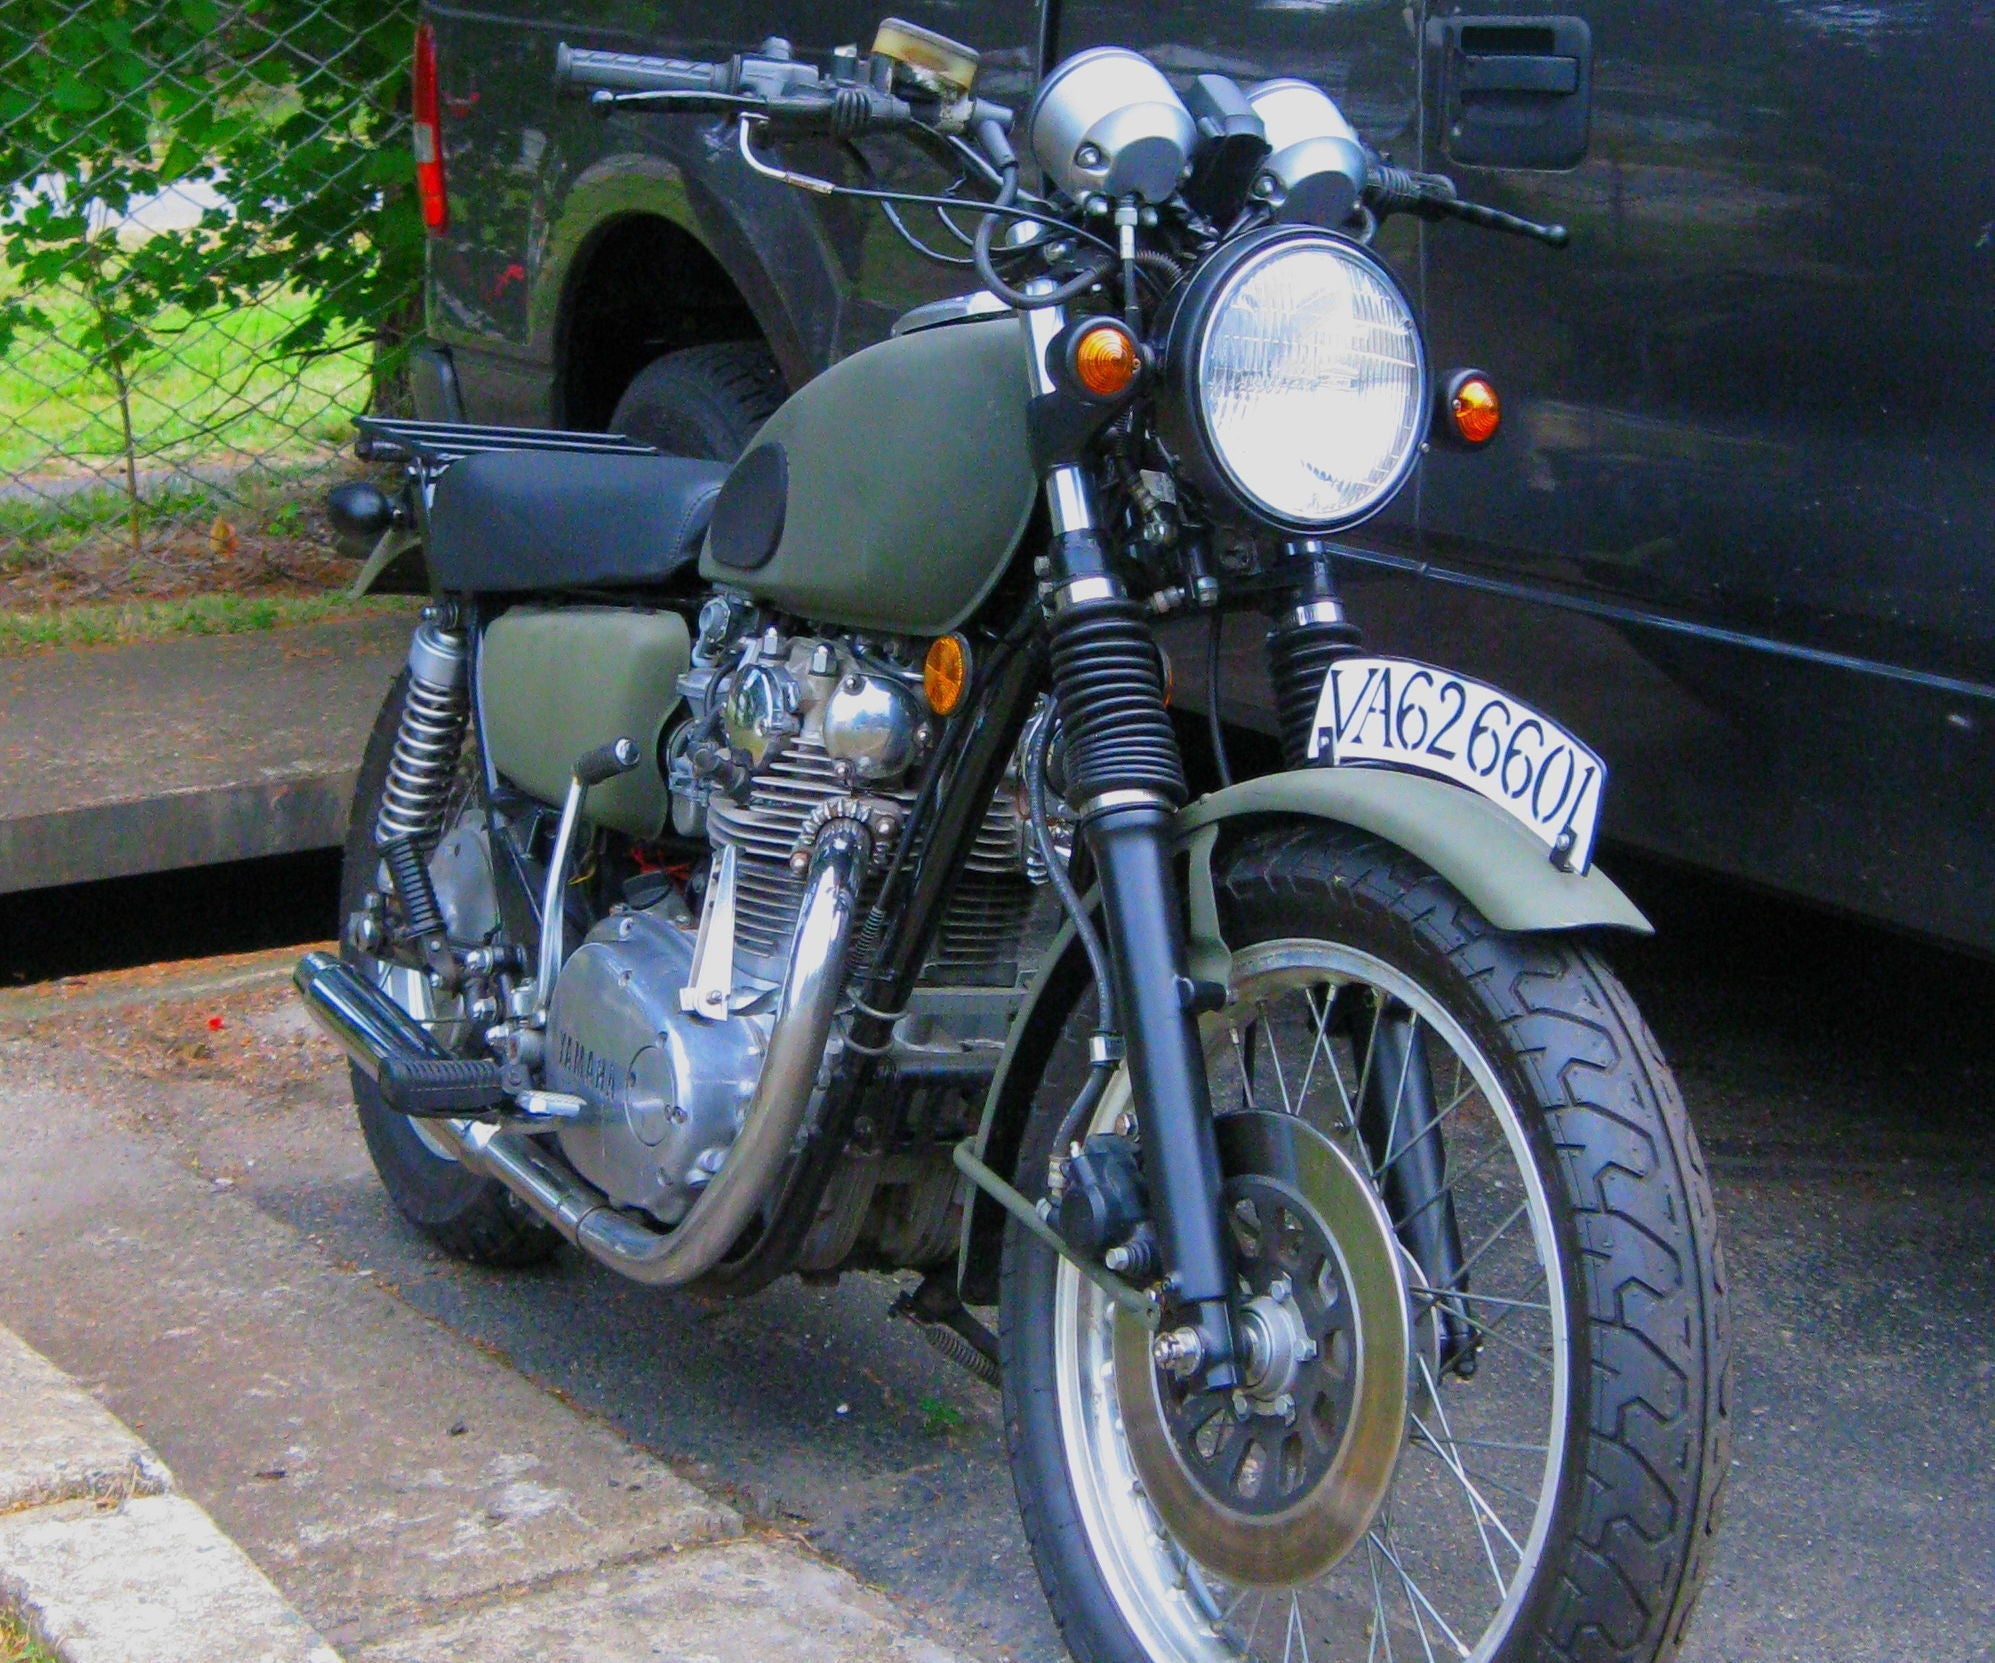 Mullet Machine to Steve McQueen – My 80/20 Rule XS650 Transformation